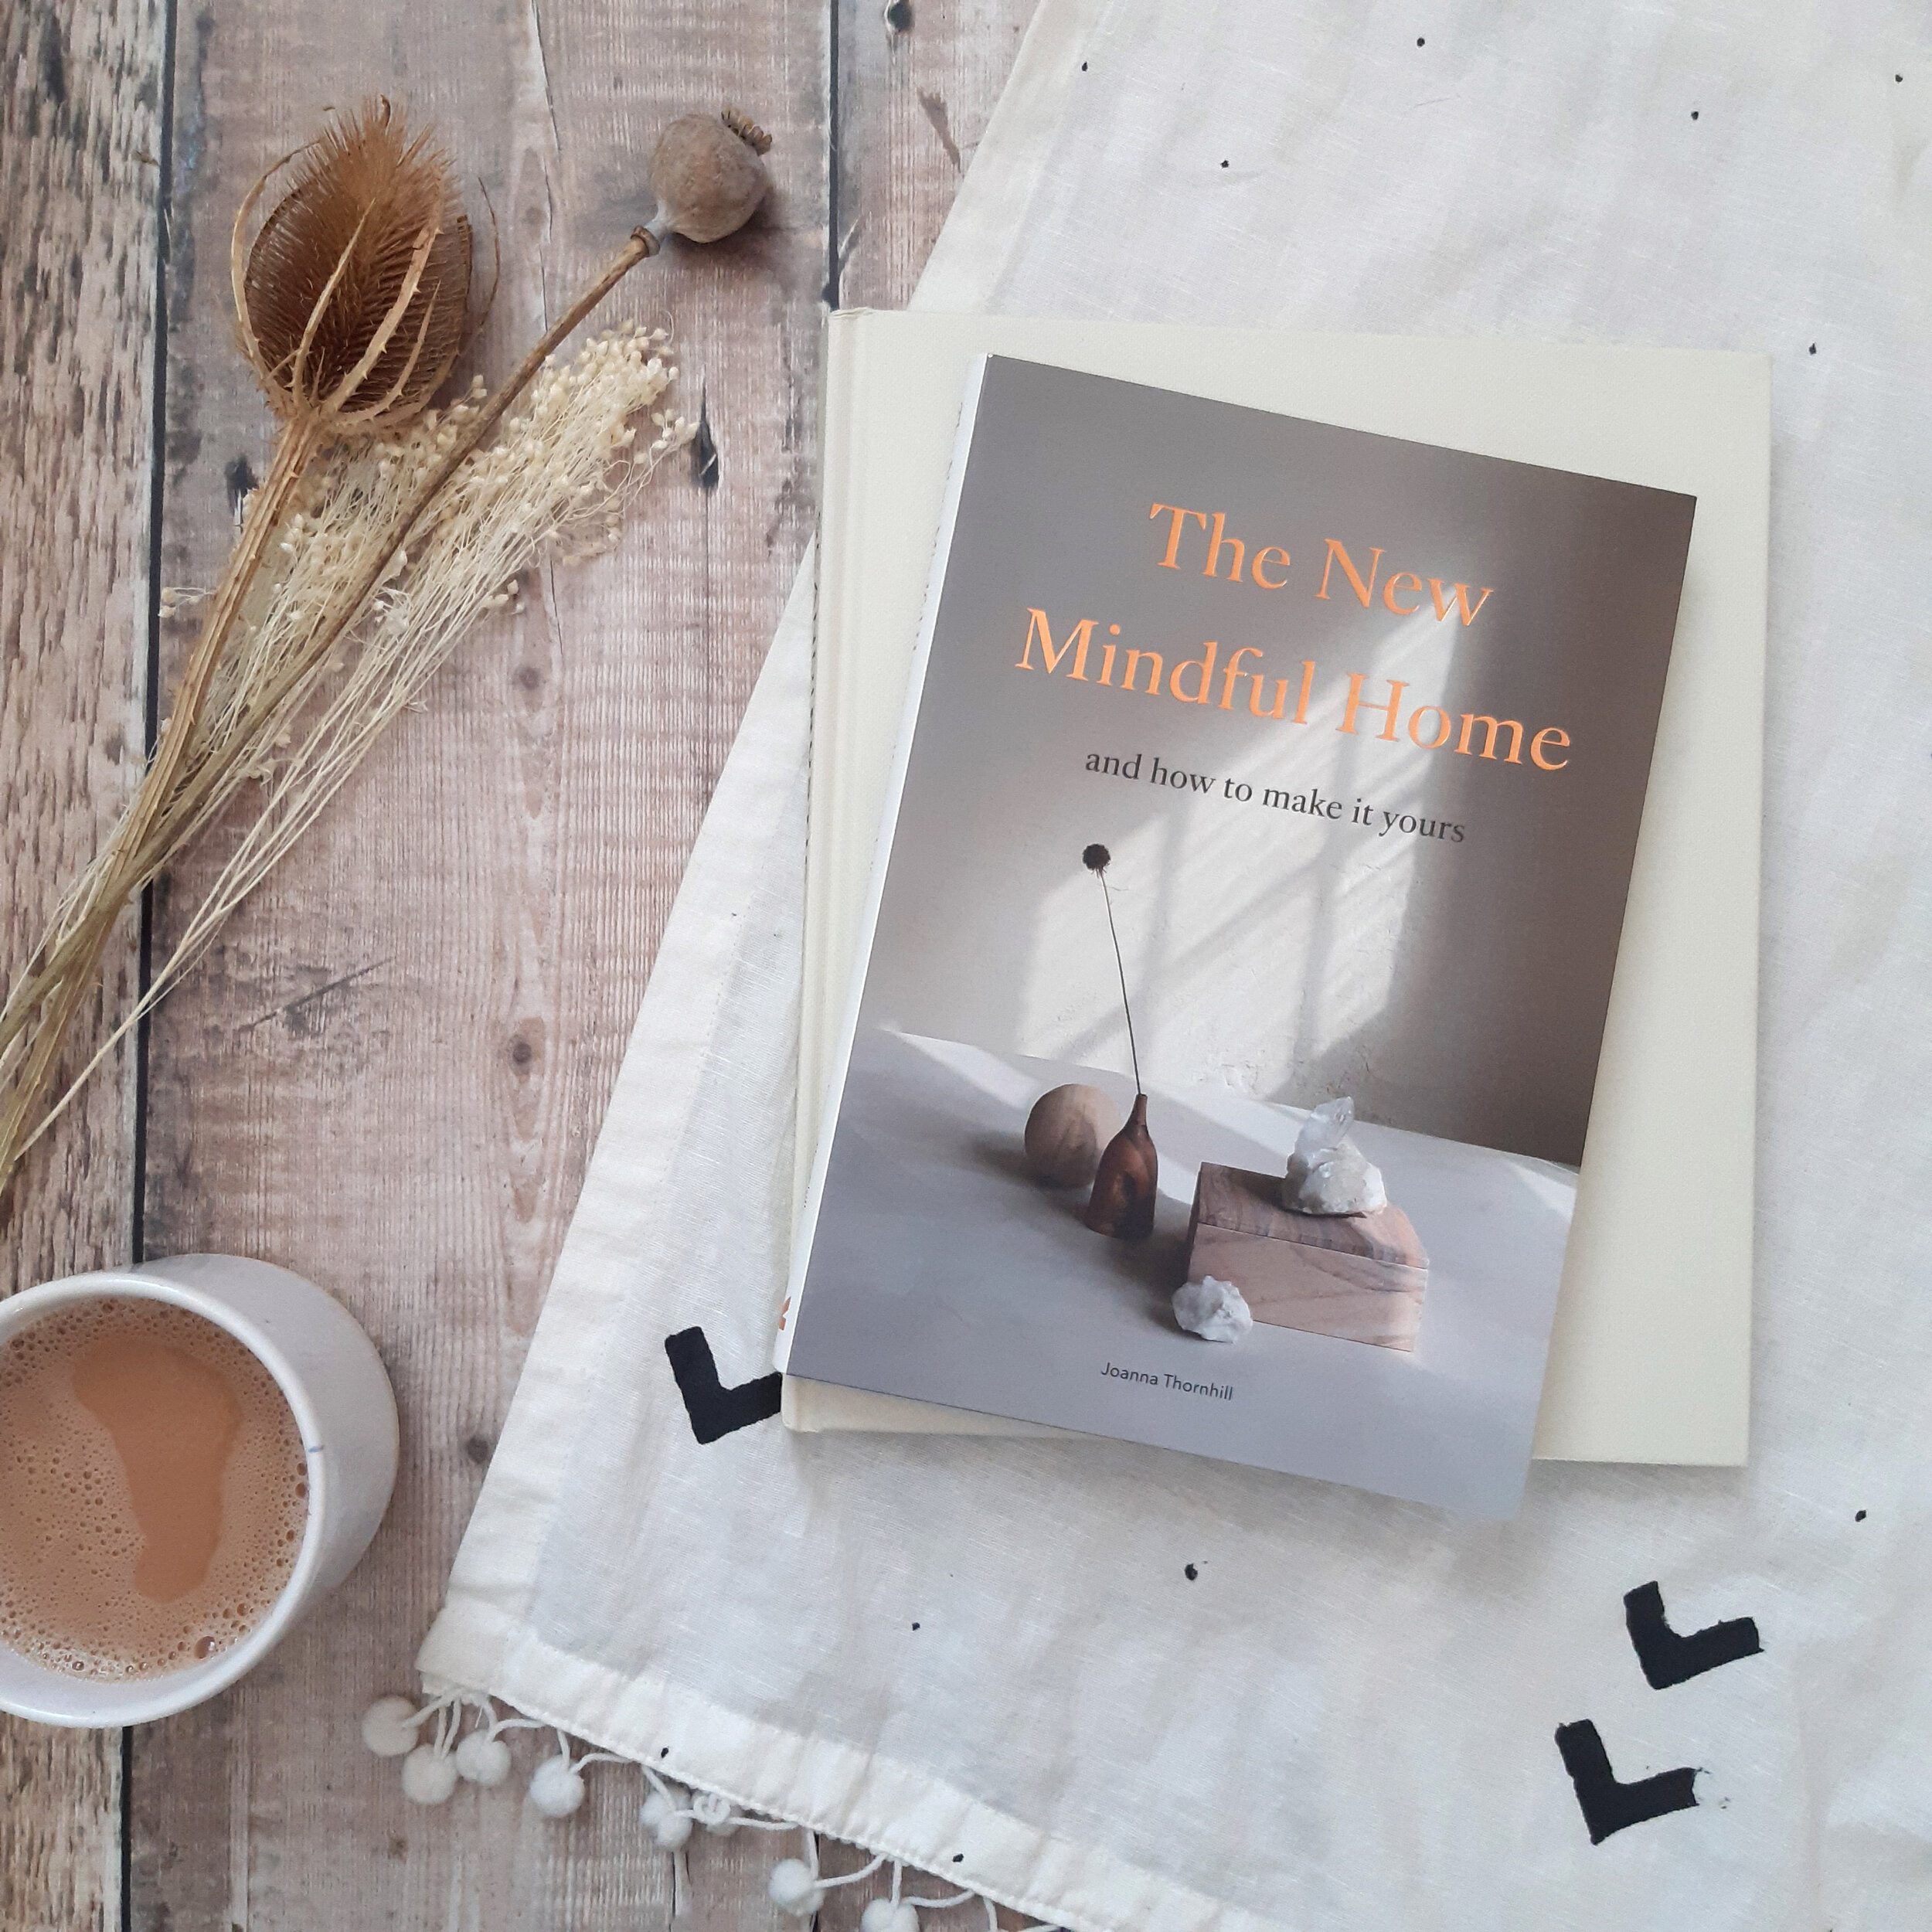 The New Mindful Home - book review by 91 Magazine